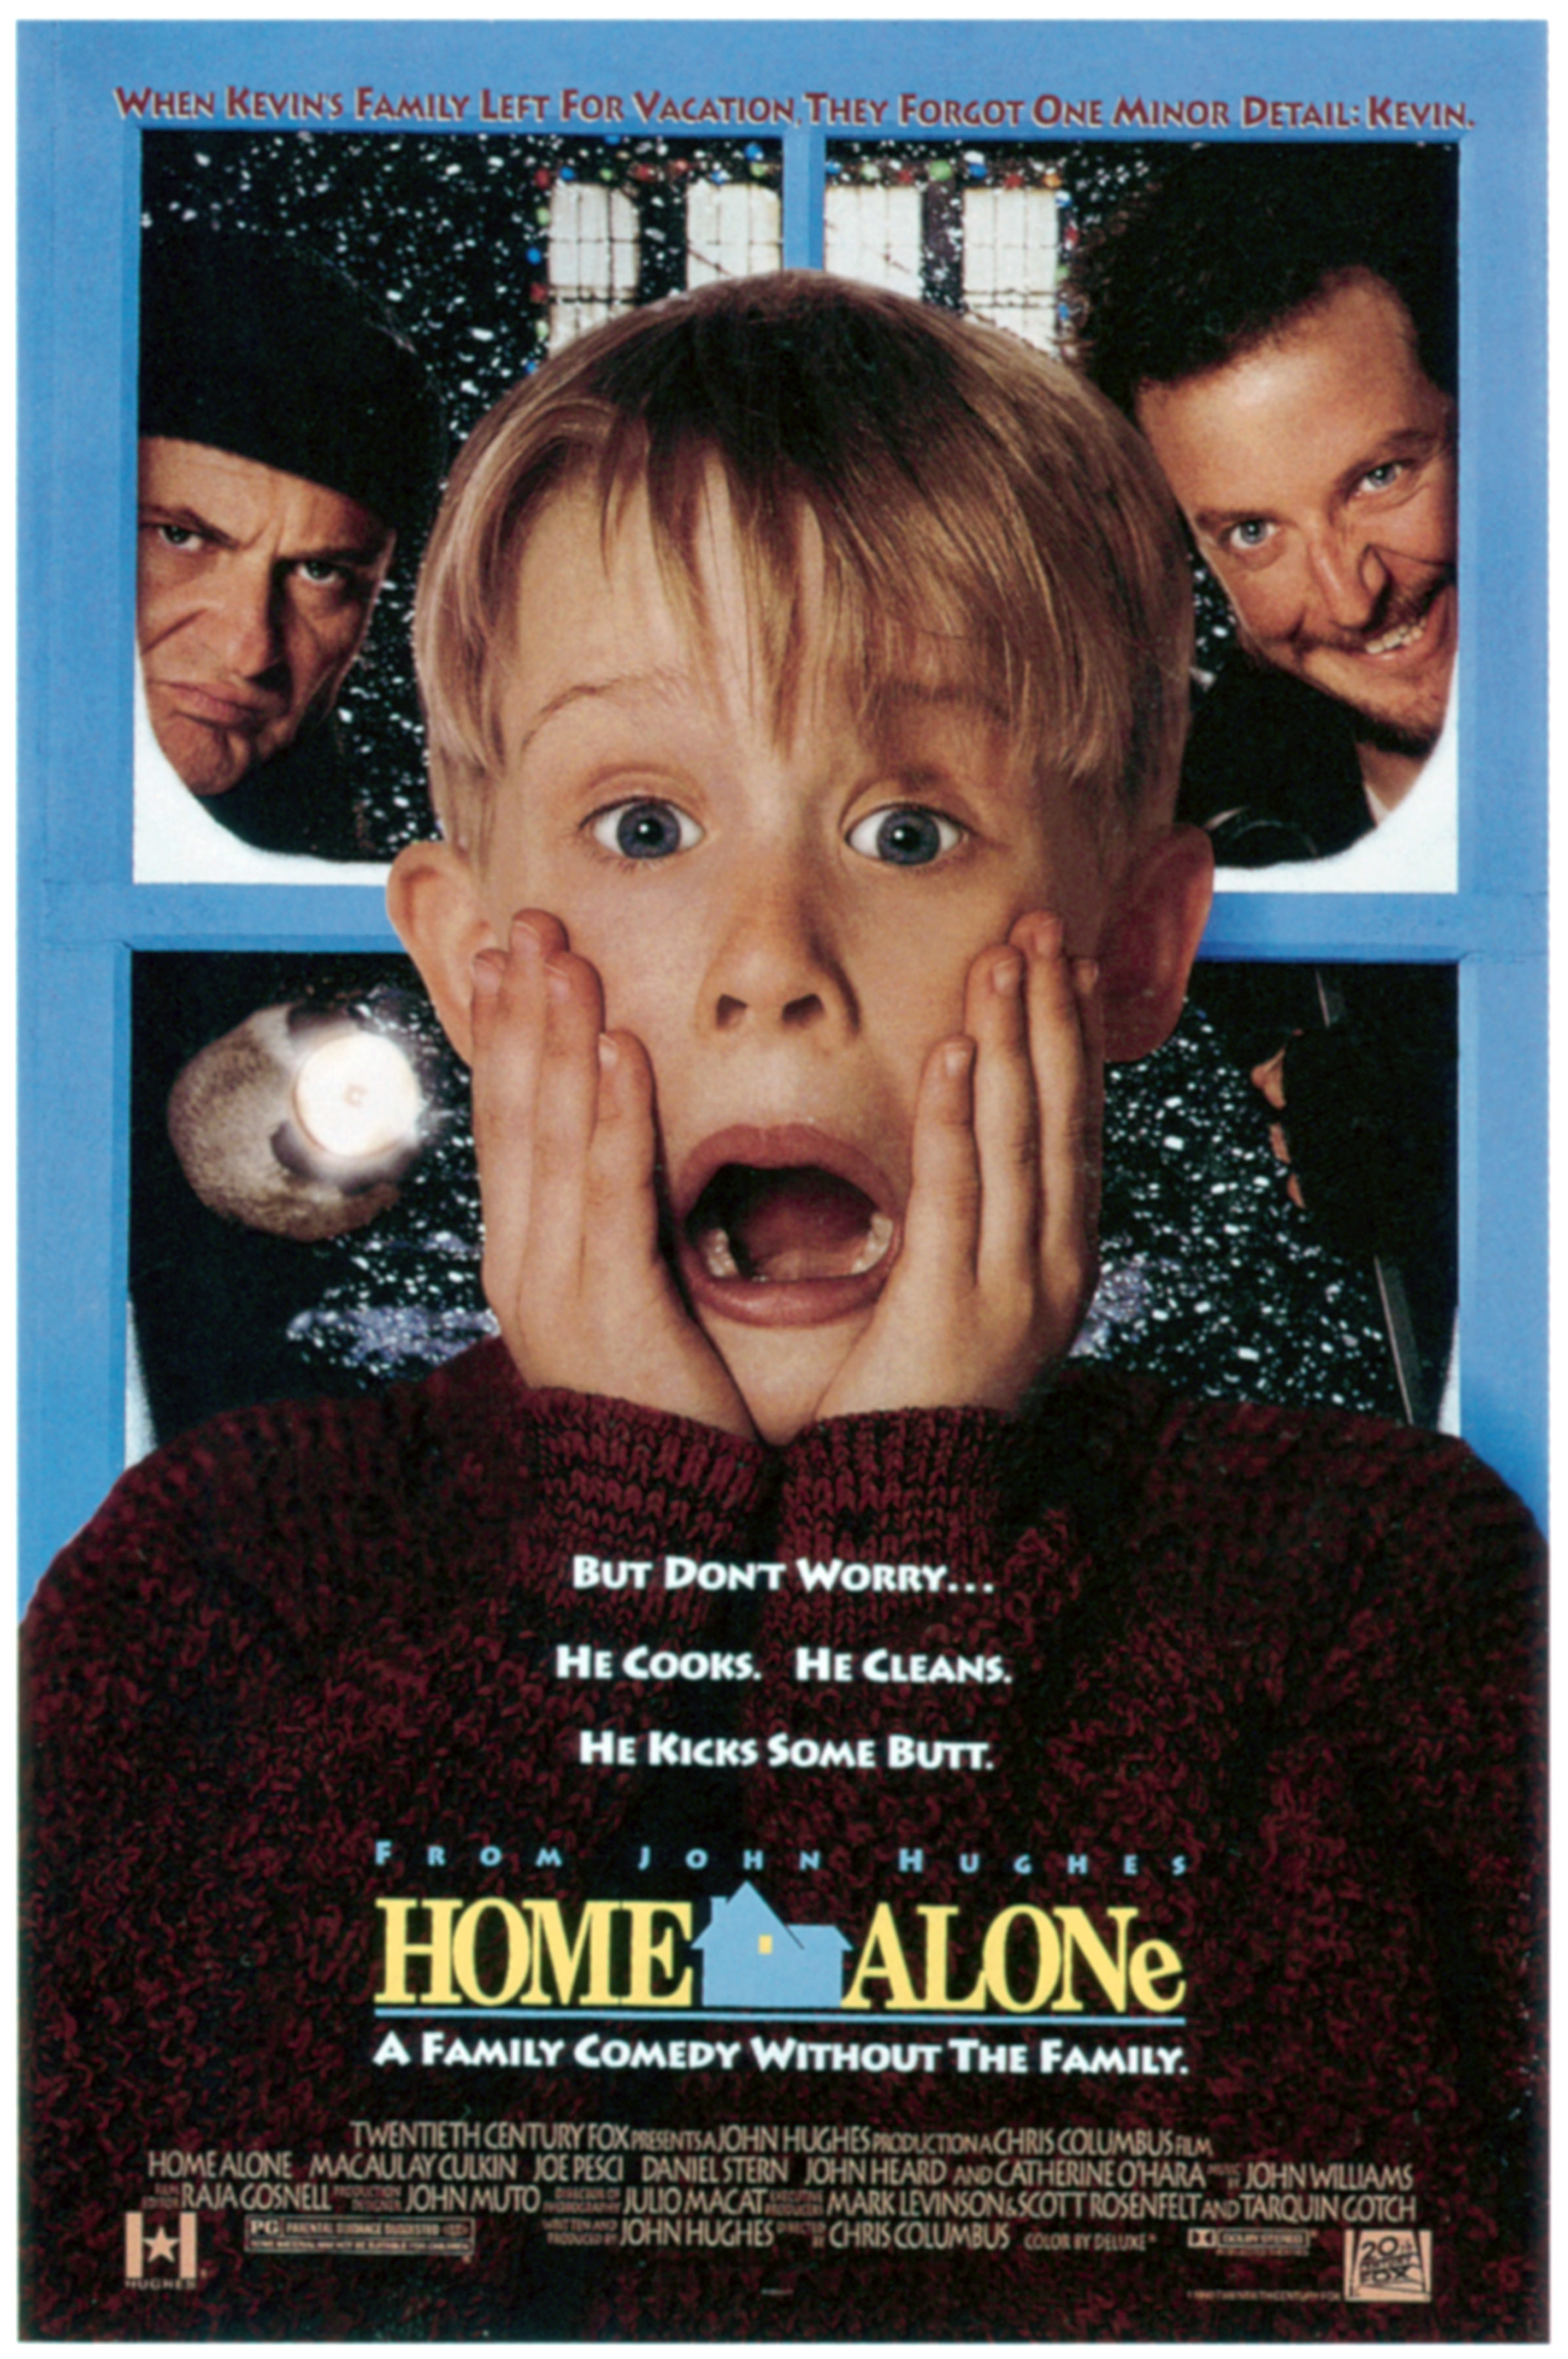 Movie poster of &quot;Home Alone&quot; featuring Kevin with a shocked expression and two burglars behind him